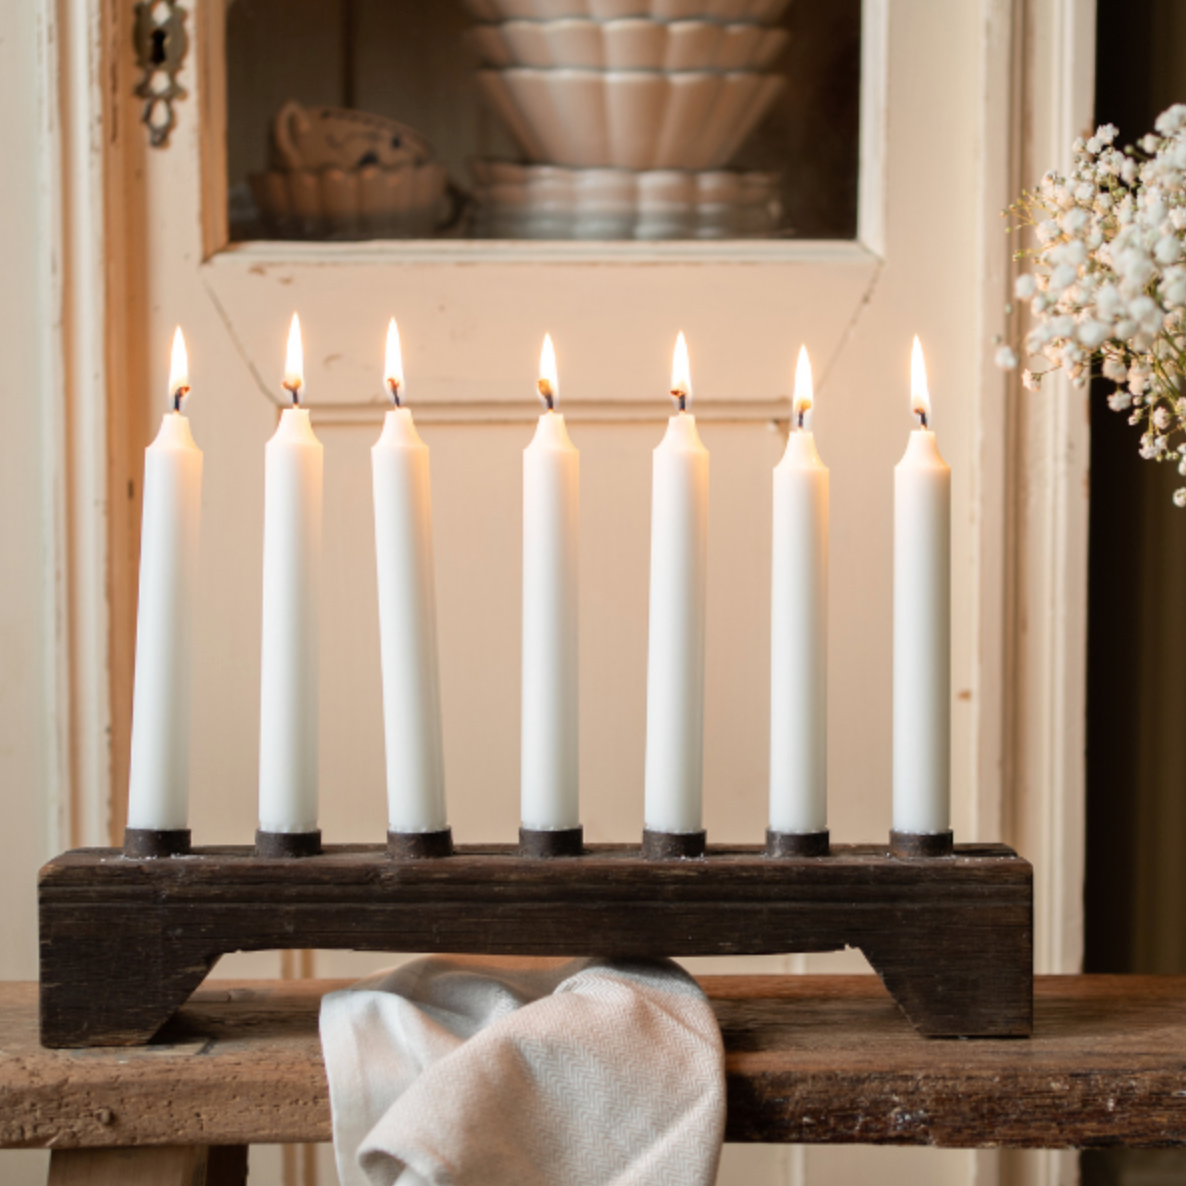  Analyzing image     Screenshot2024-02-29at13.37.17  1262 × 1262px  A wooden candle holder holding seven lit dinner candles.